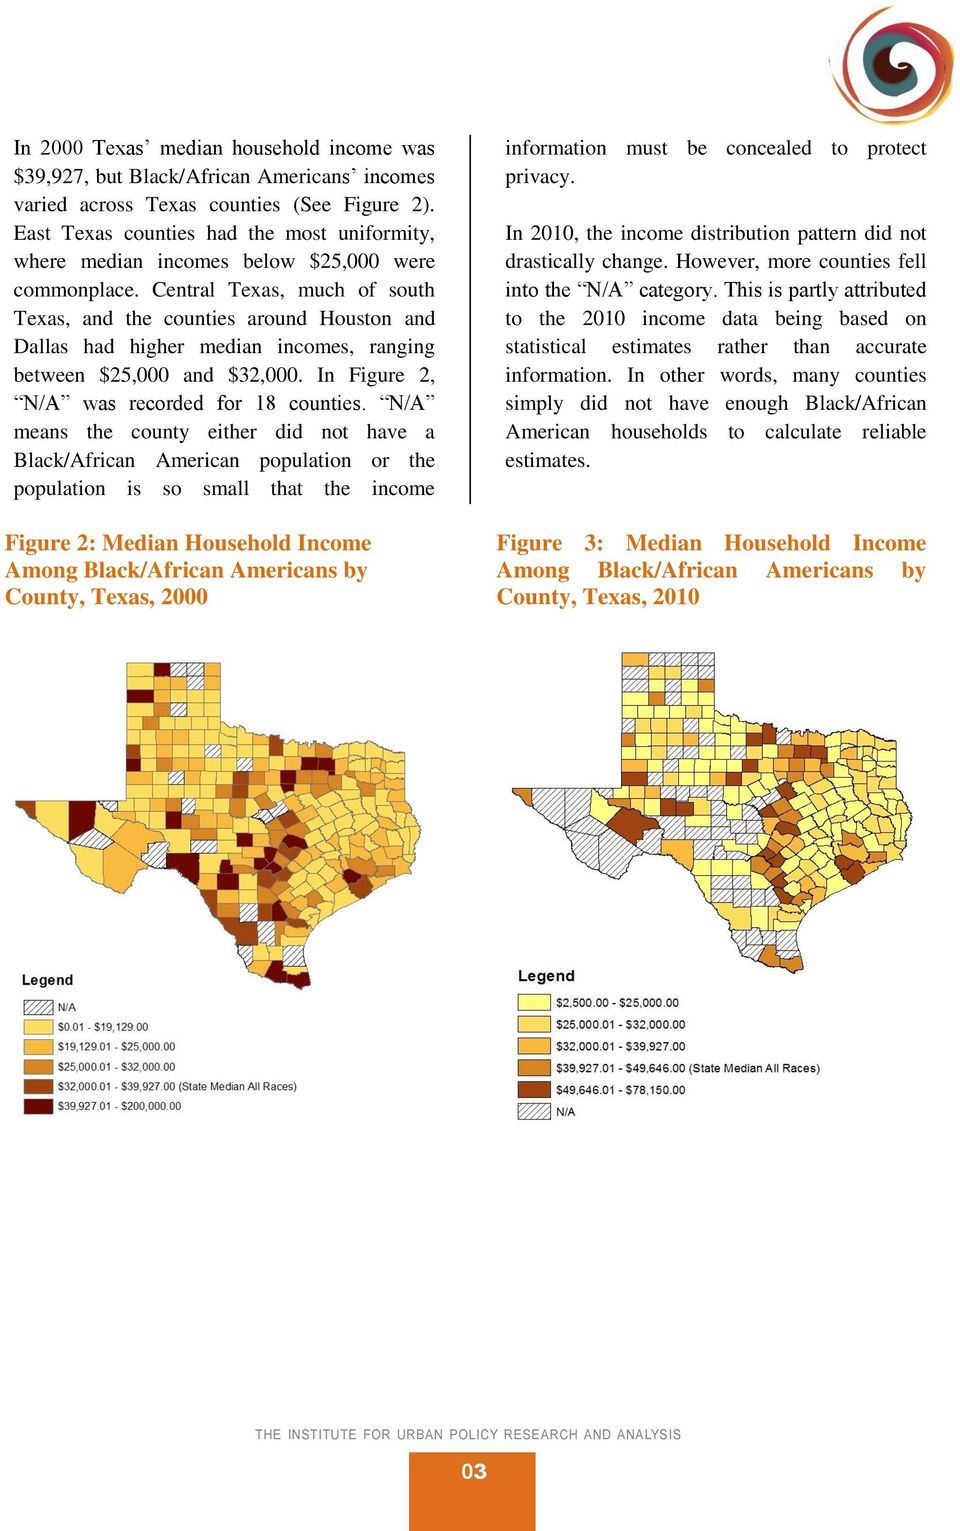 Central Texas, much of south Texas, and the counties around Houston and Dallas had higher median incomes, ranging between $25,000 and $32,000. In Figure 2, N/A was recorded for 18 counties.